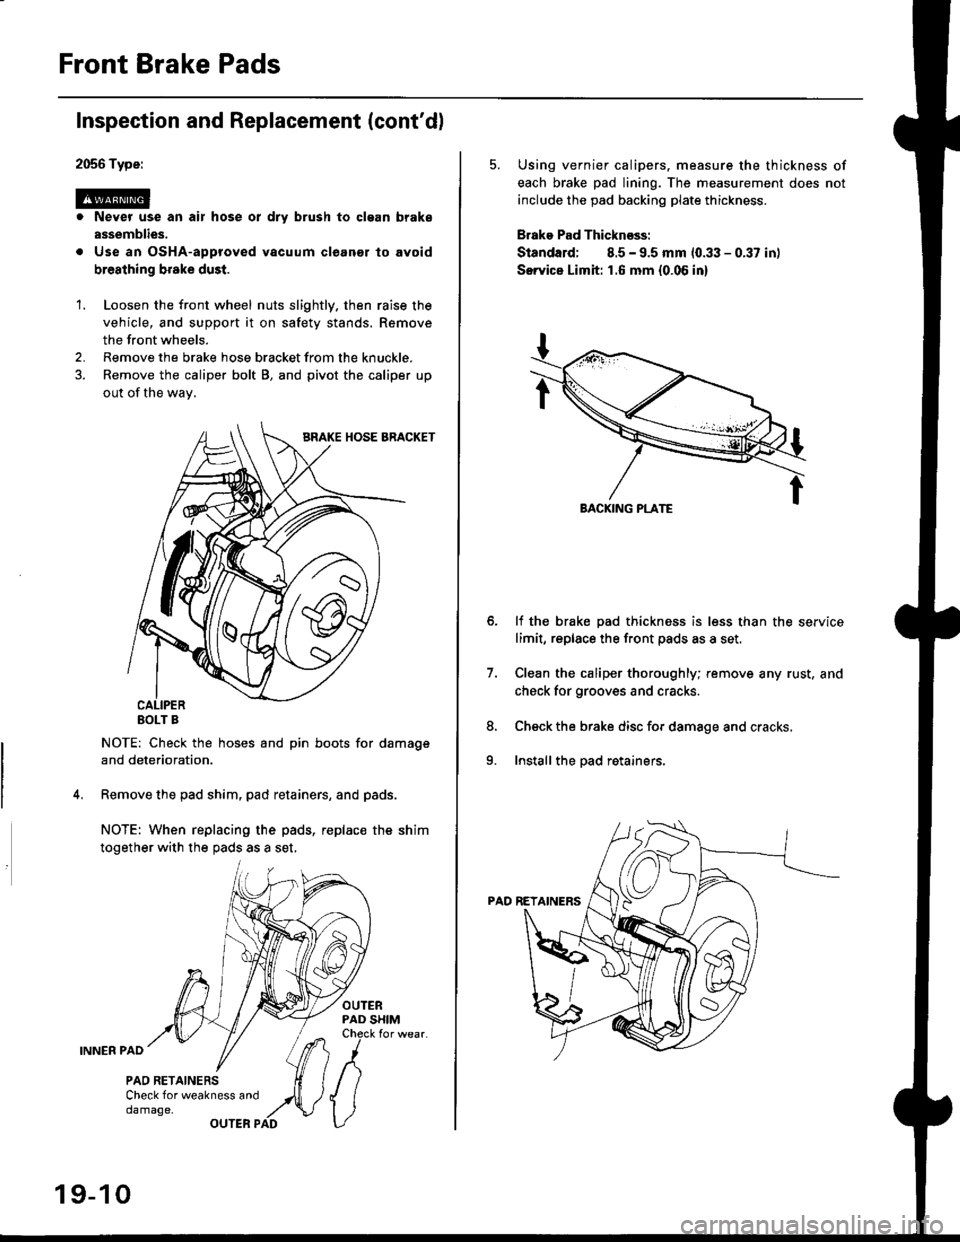 HONDA CIVIC 1996 6.G Service Manual Front Brake Pads
2056 Type:
@. Never use an air hose or dry brush to clgan brake
assemblies.
. Use an OsHA-approved vacuum cleanor lo avoid
breathing broke dust.
Inspection and Replacement (contdl
1.